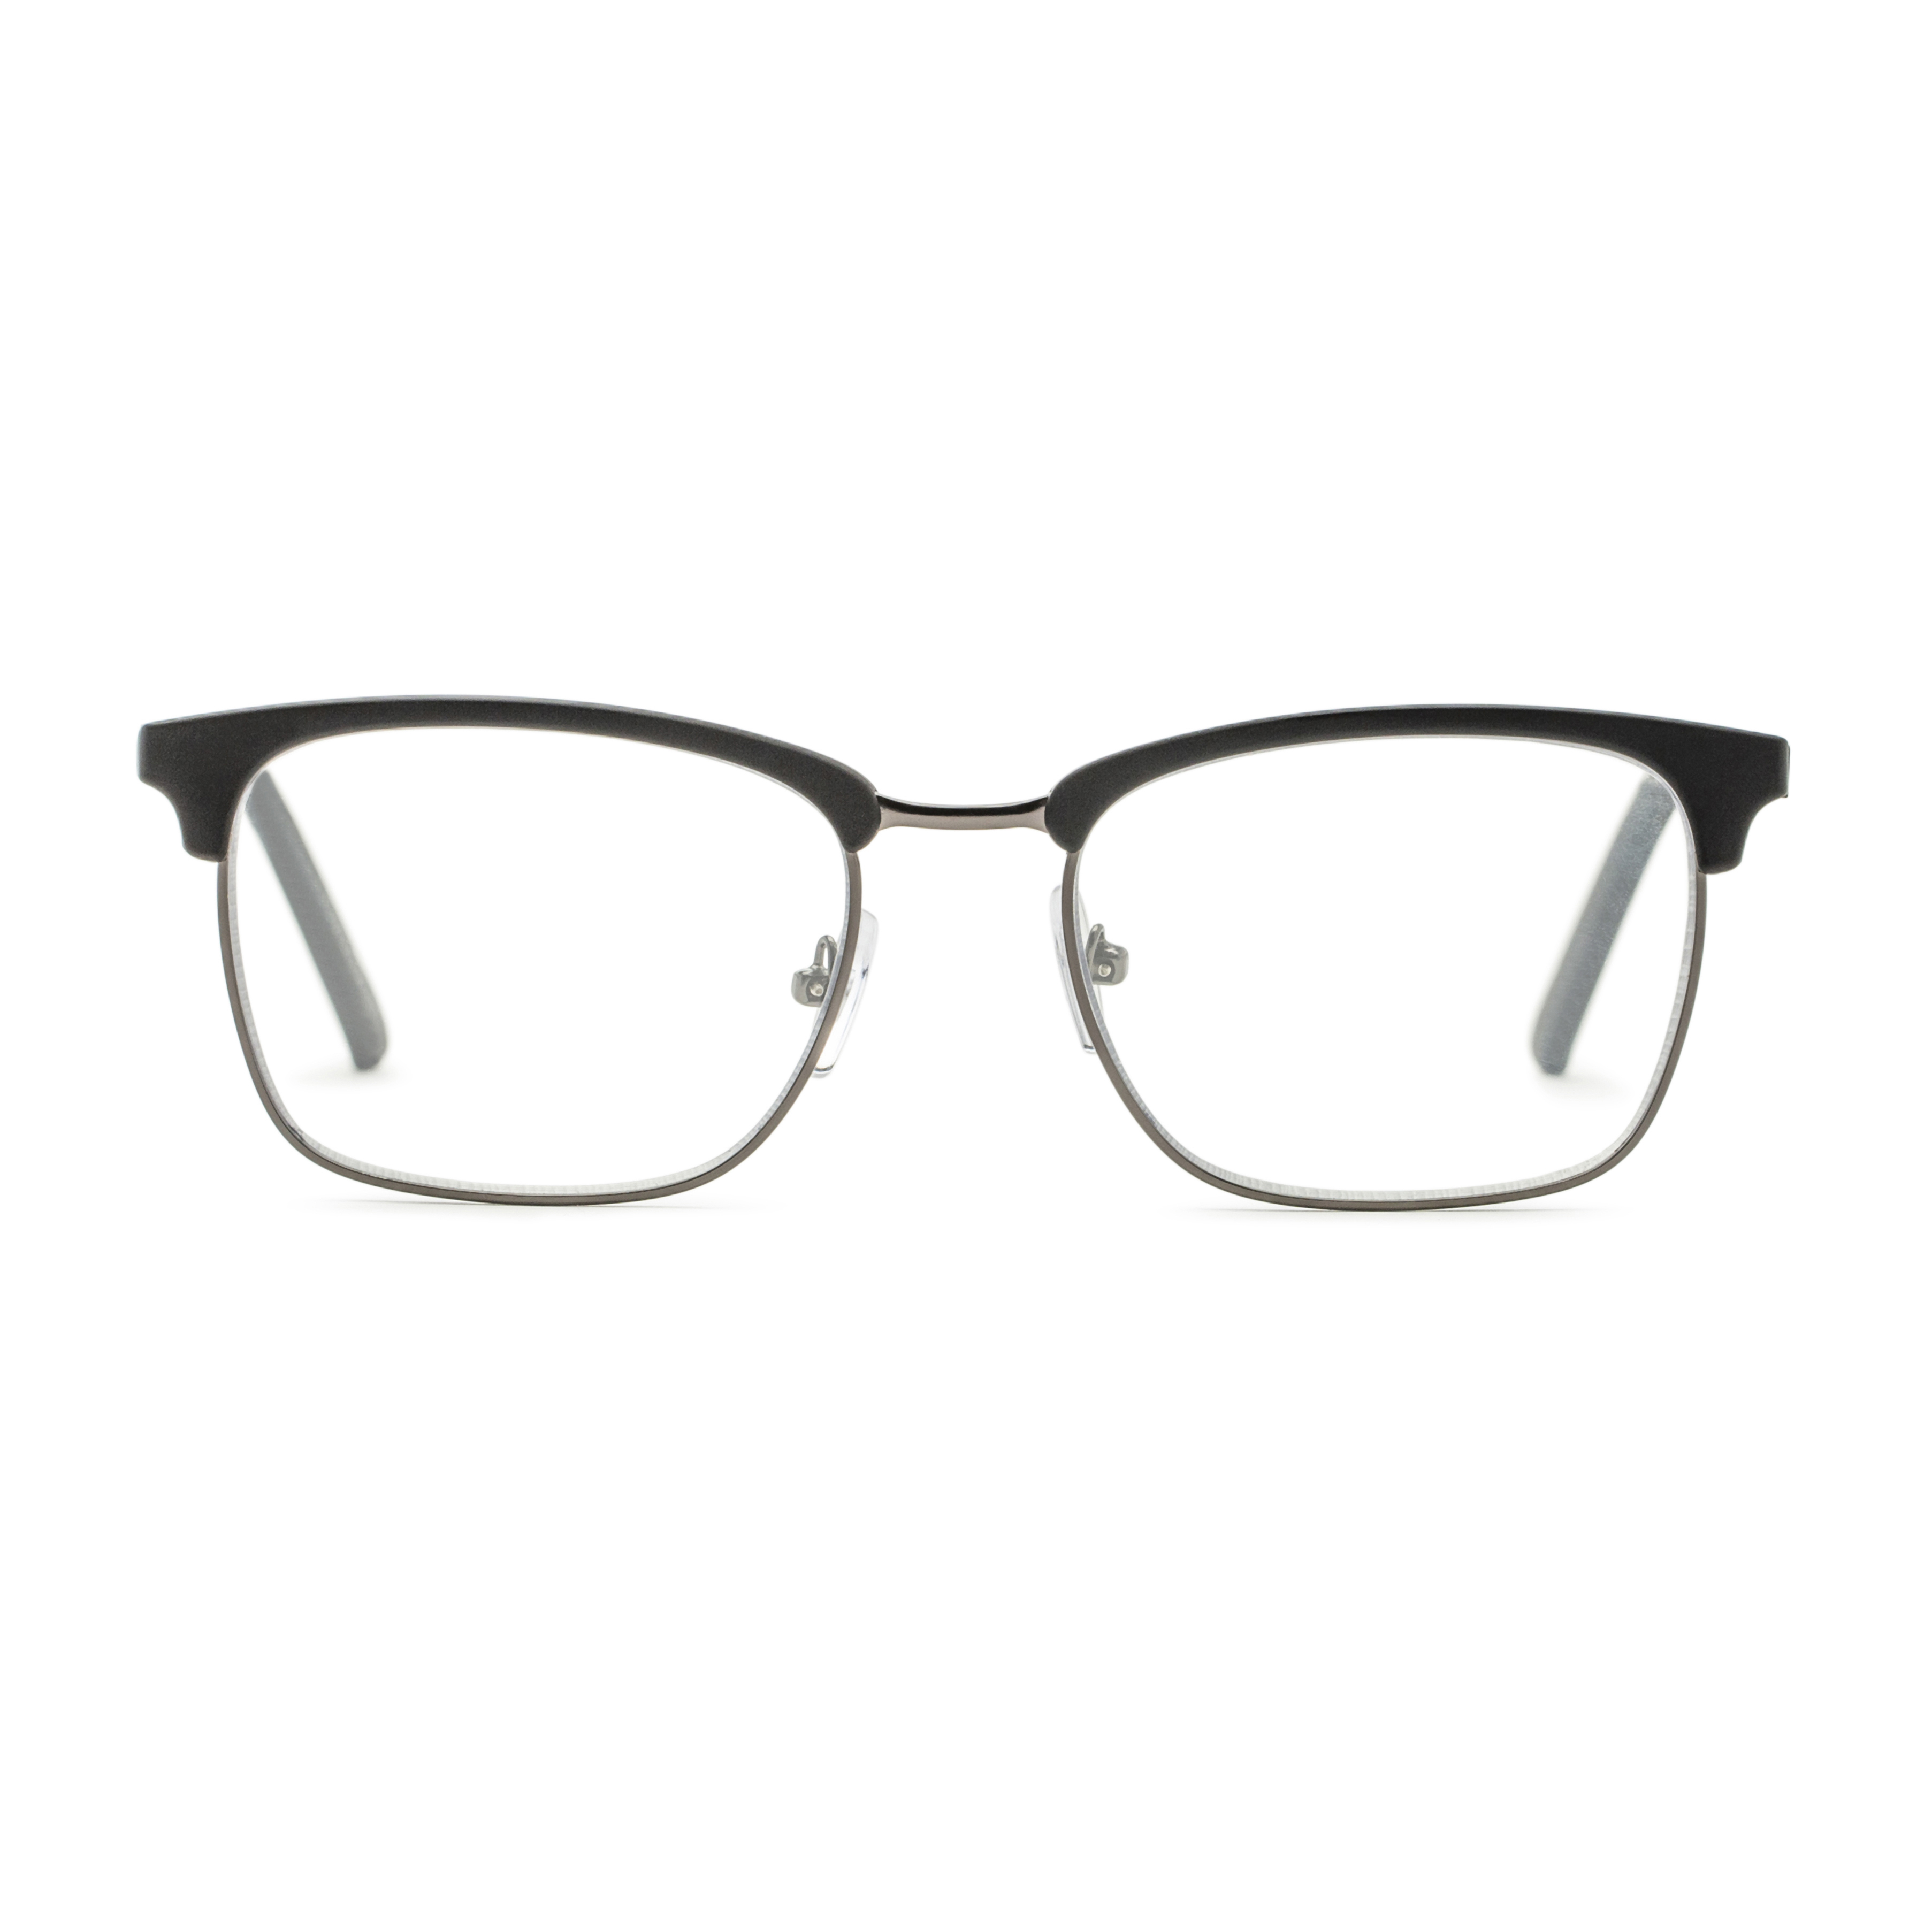 Men's Club Reading Glasses In Black By Foster Grant - Perkins Pop Of Power® Bifocal Style Readers - +2.75